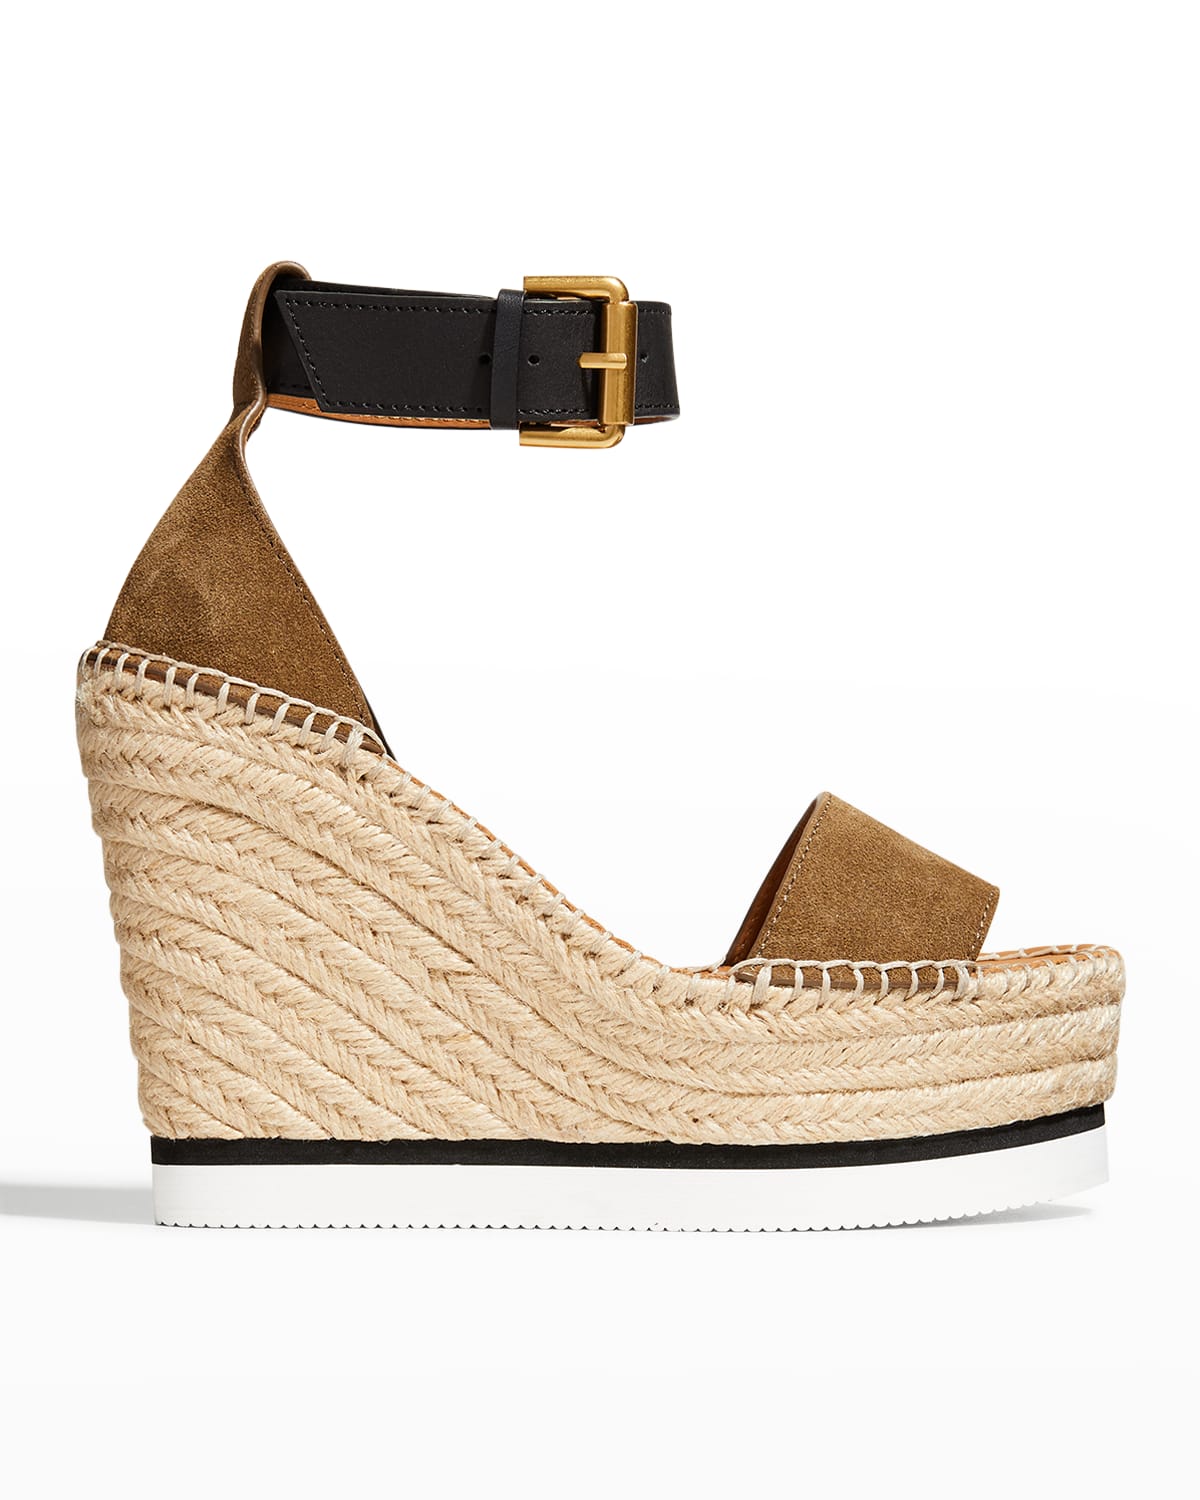 SEE BY CHLOÉ GLYN BICOLOR WEDGE ESPADRILLE SANDALS